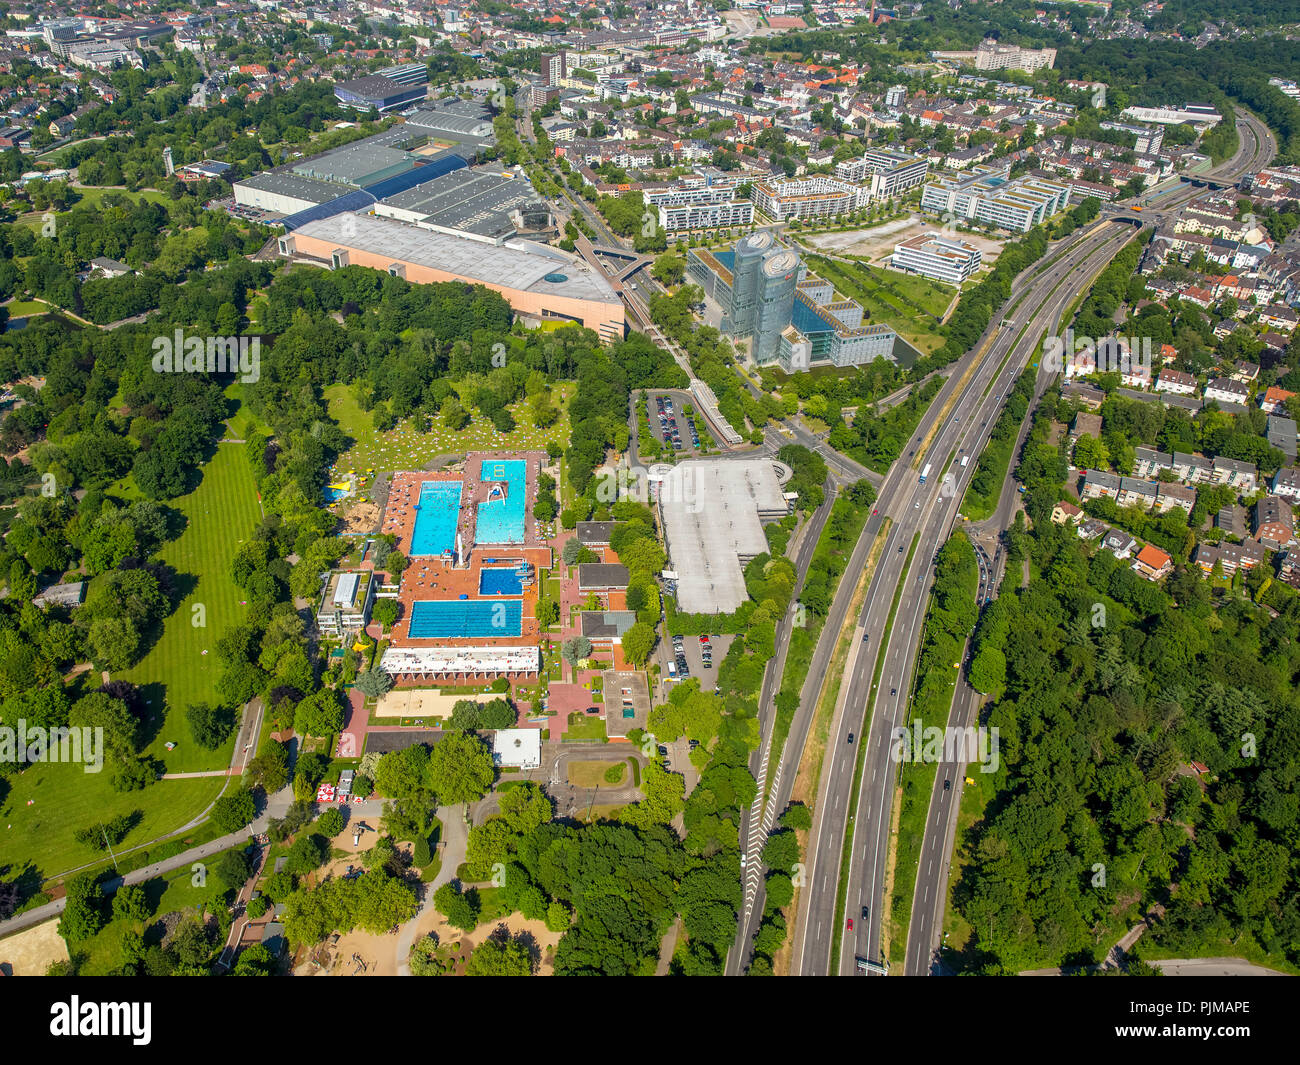 Bathers, sunbathing, swimming pool, sunbathing areas, bath towels, bathers, swimmers, pool area, Grugabad Essen, outdoor swimming pool on the hottest day in spring 2015, Essen, Ruhr area, North Rhine-Westphalia, Germany Stock Photo